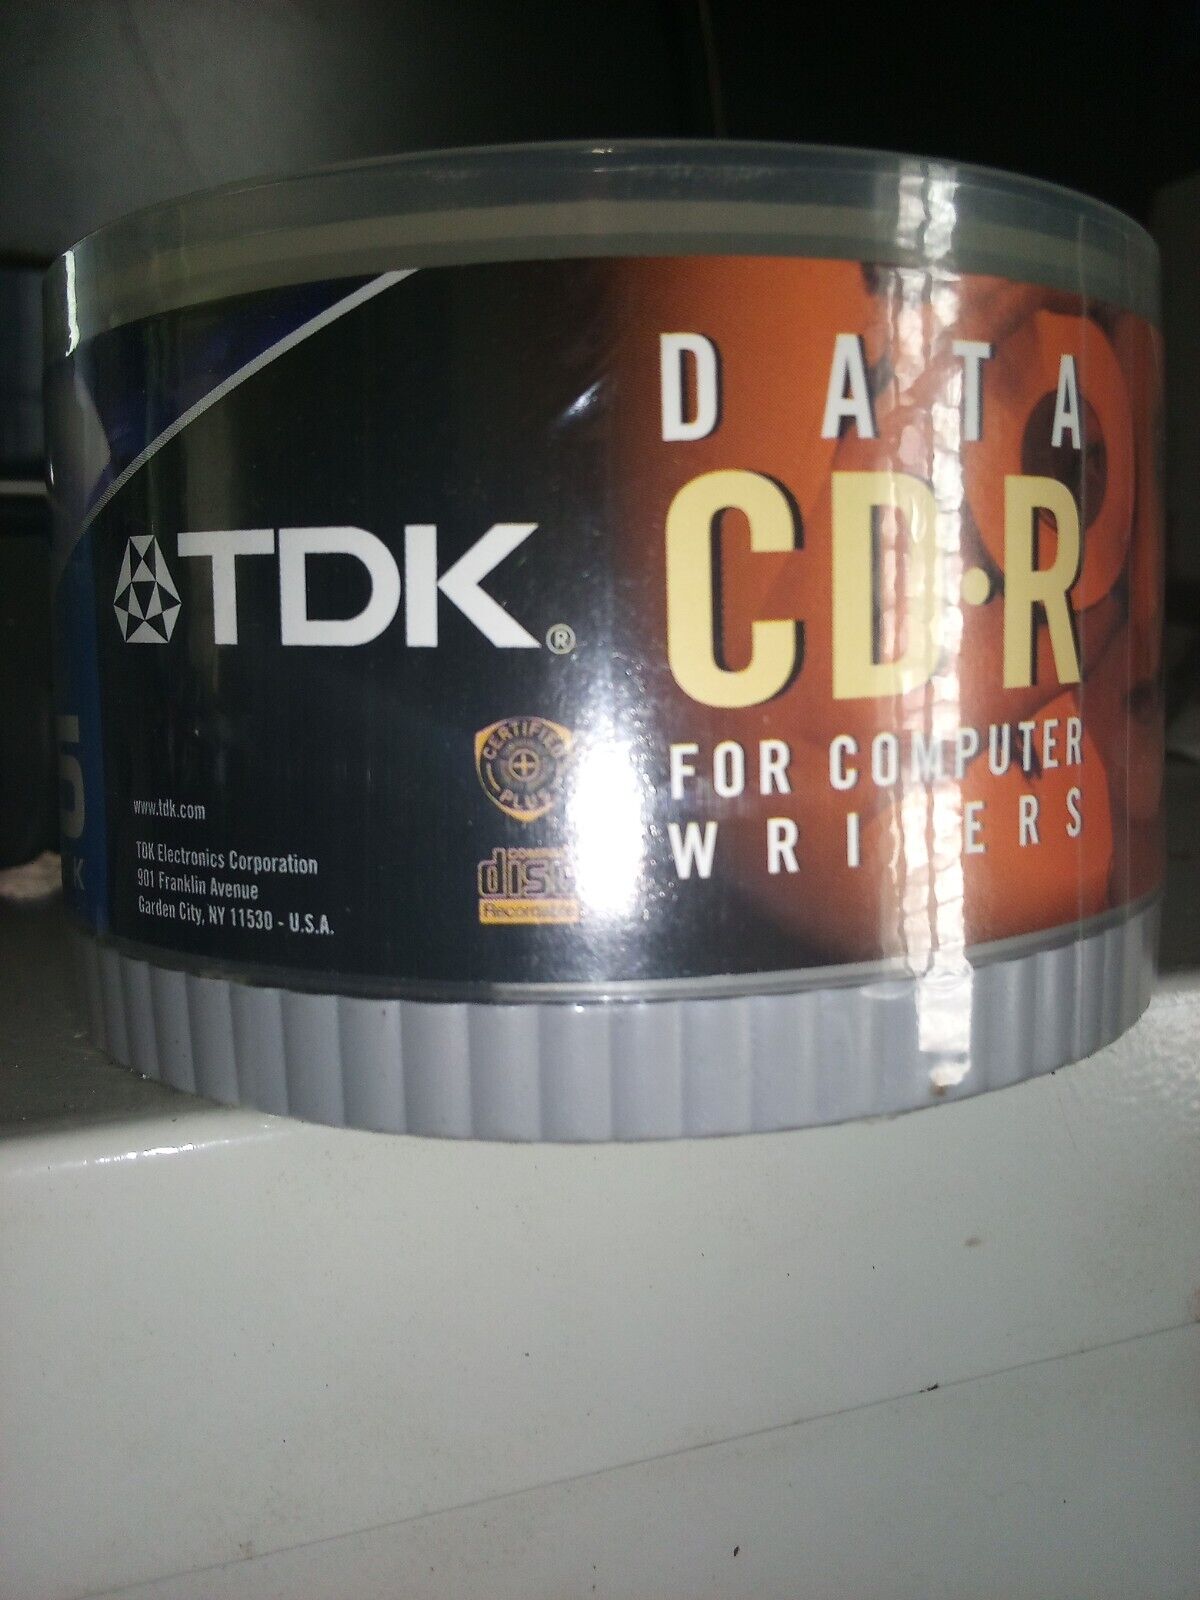 NEW 25 Pack TDK DISCS Data CD-R 24 MINUTE 210MB 24x. For Computer Writers